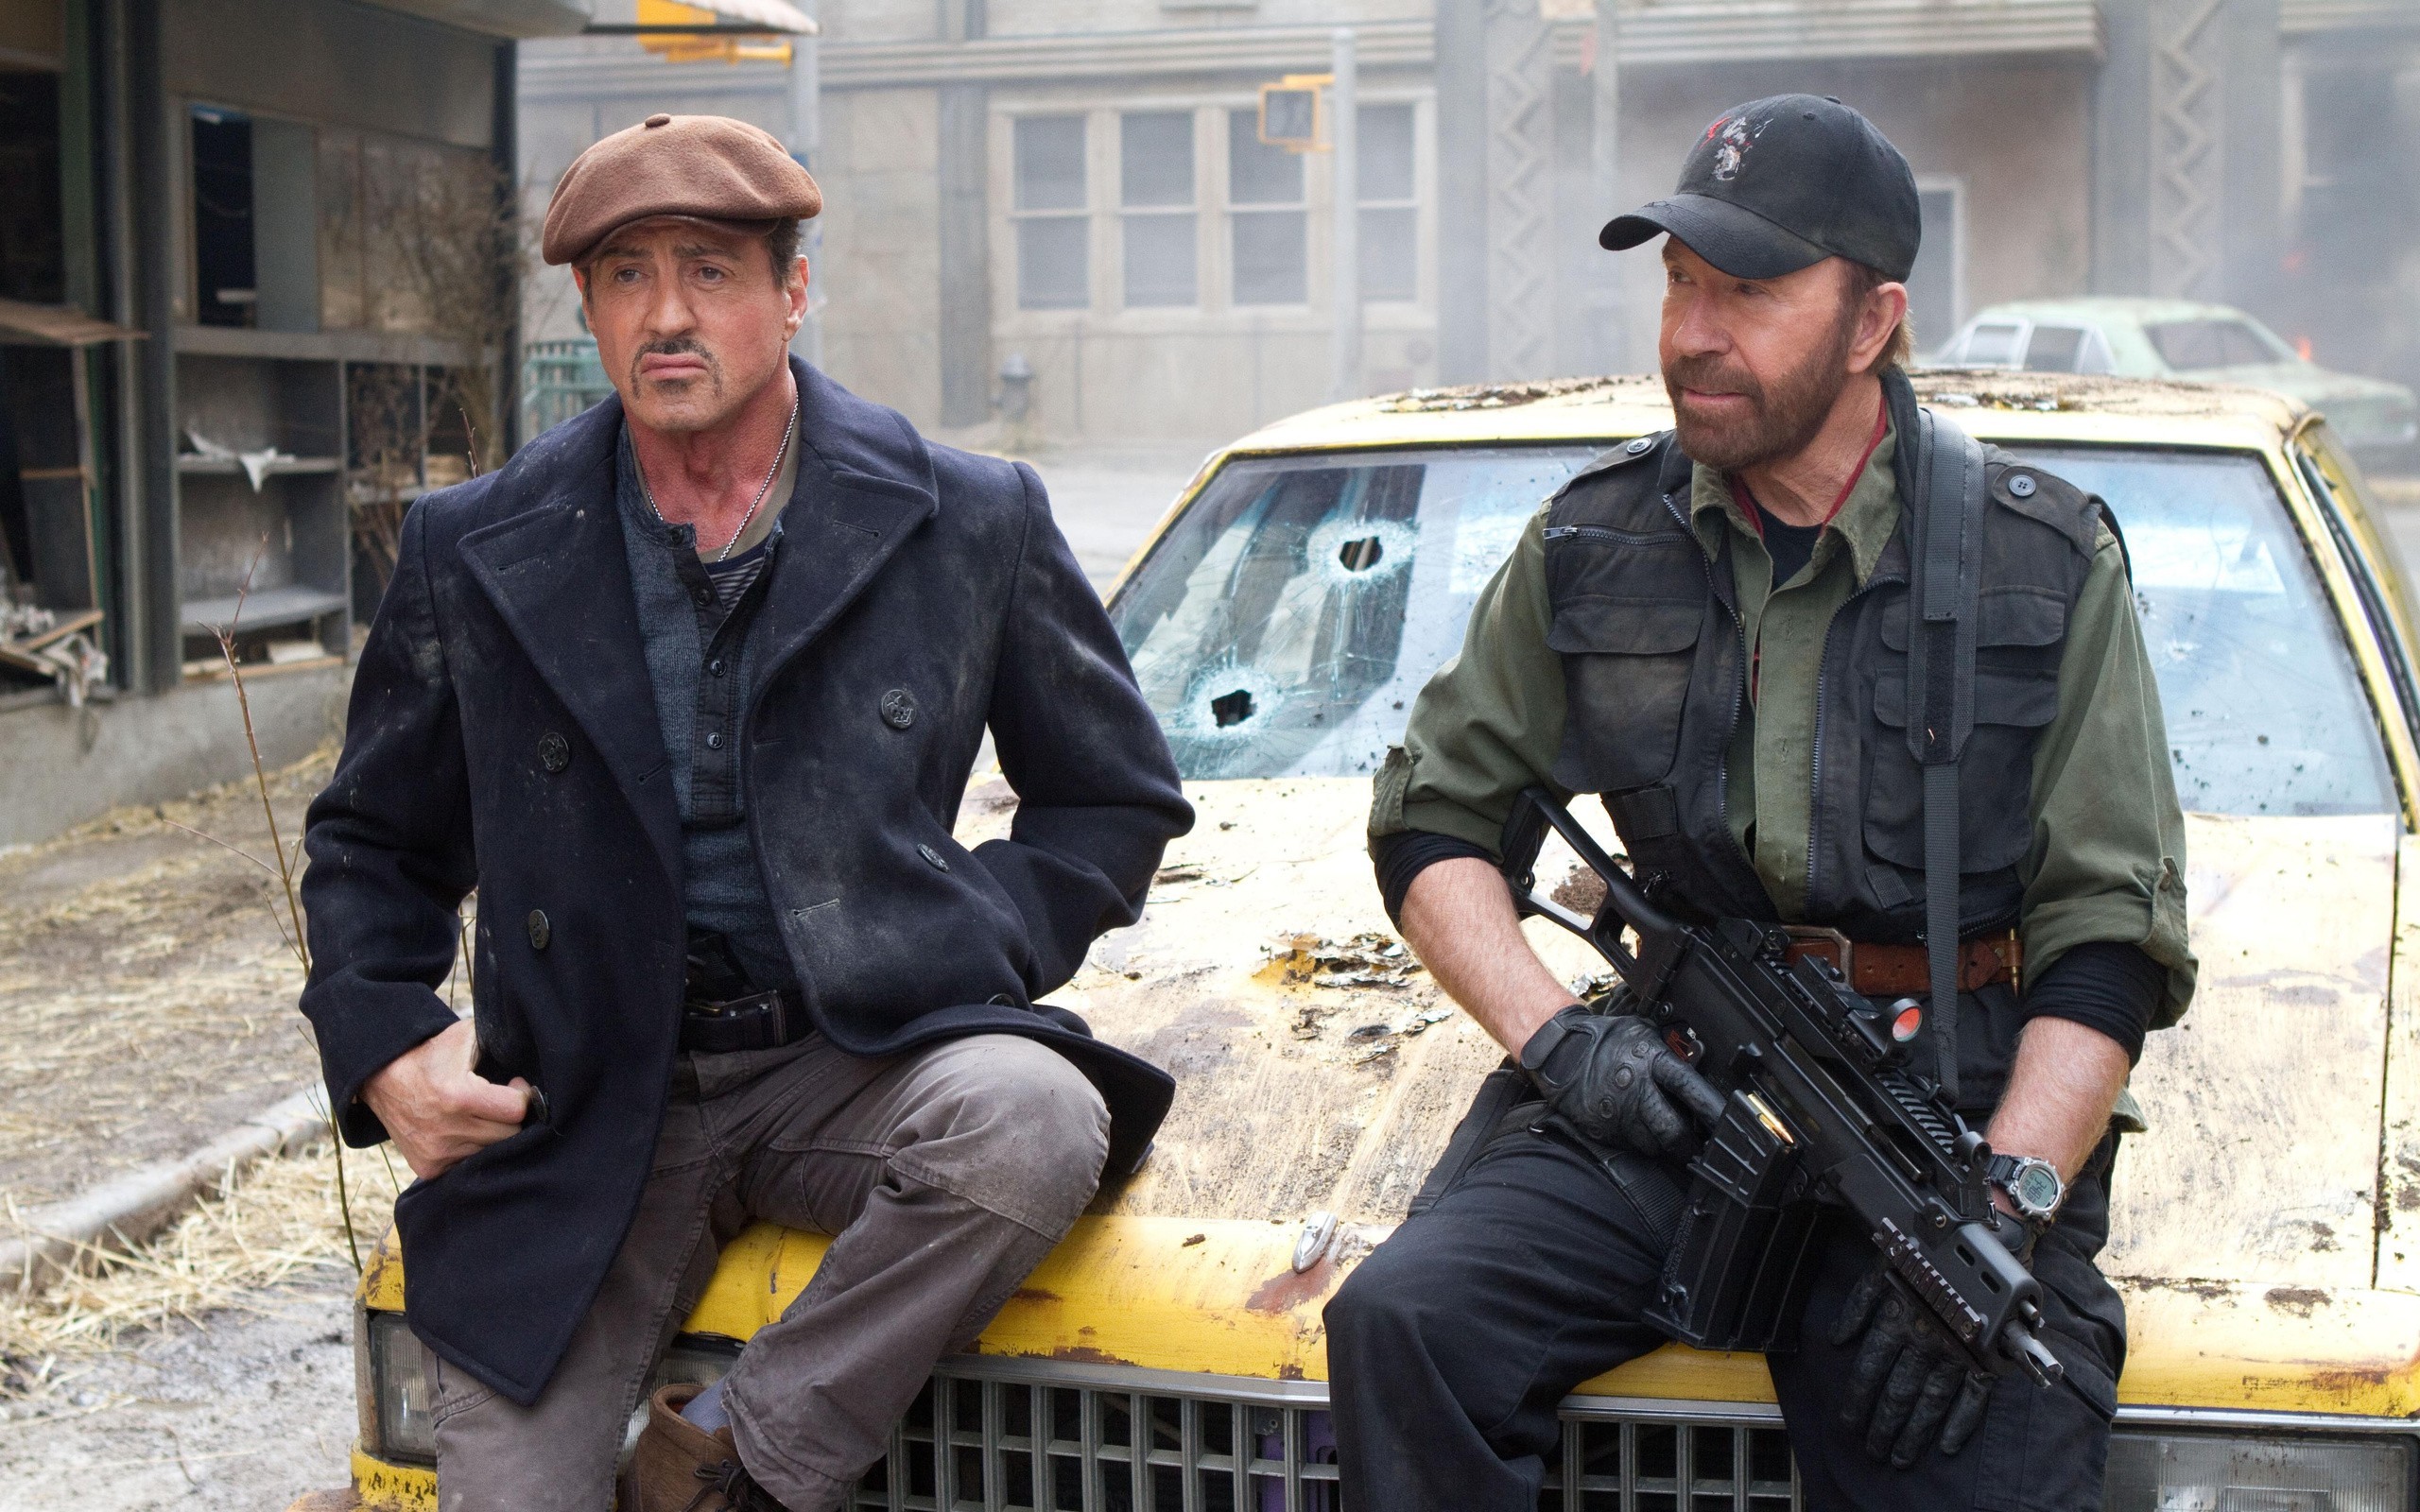 People 2560x1600 The Expendables 2 movies Sylvester Stallone Chuck Norris men machine gun weapon